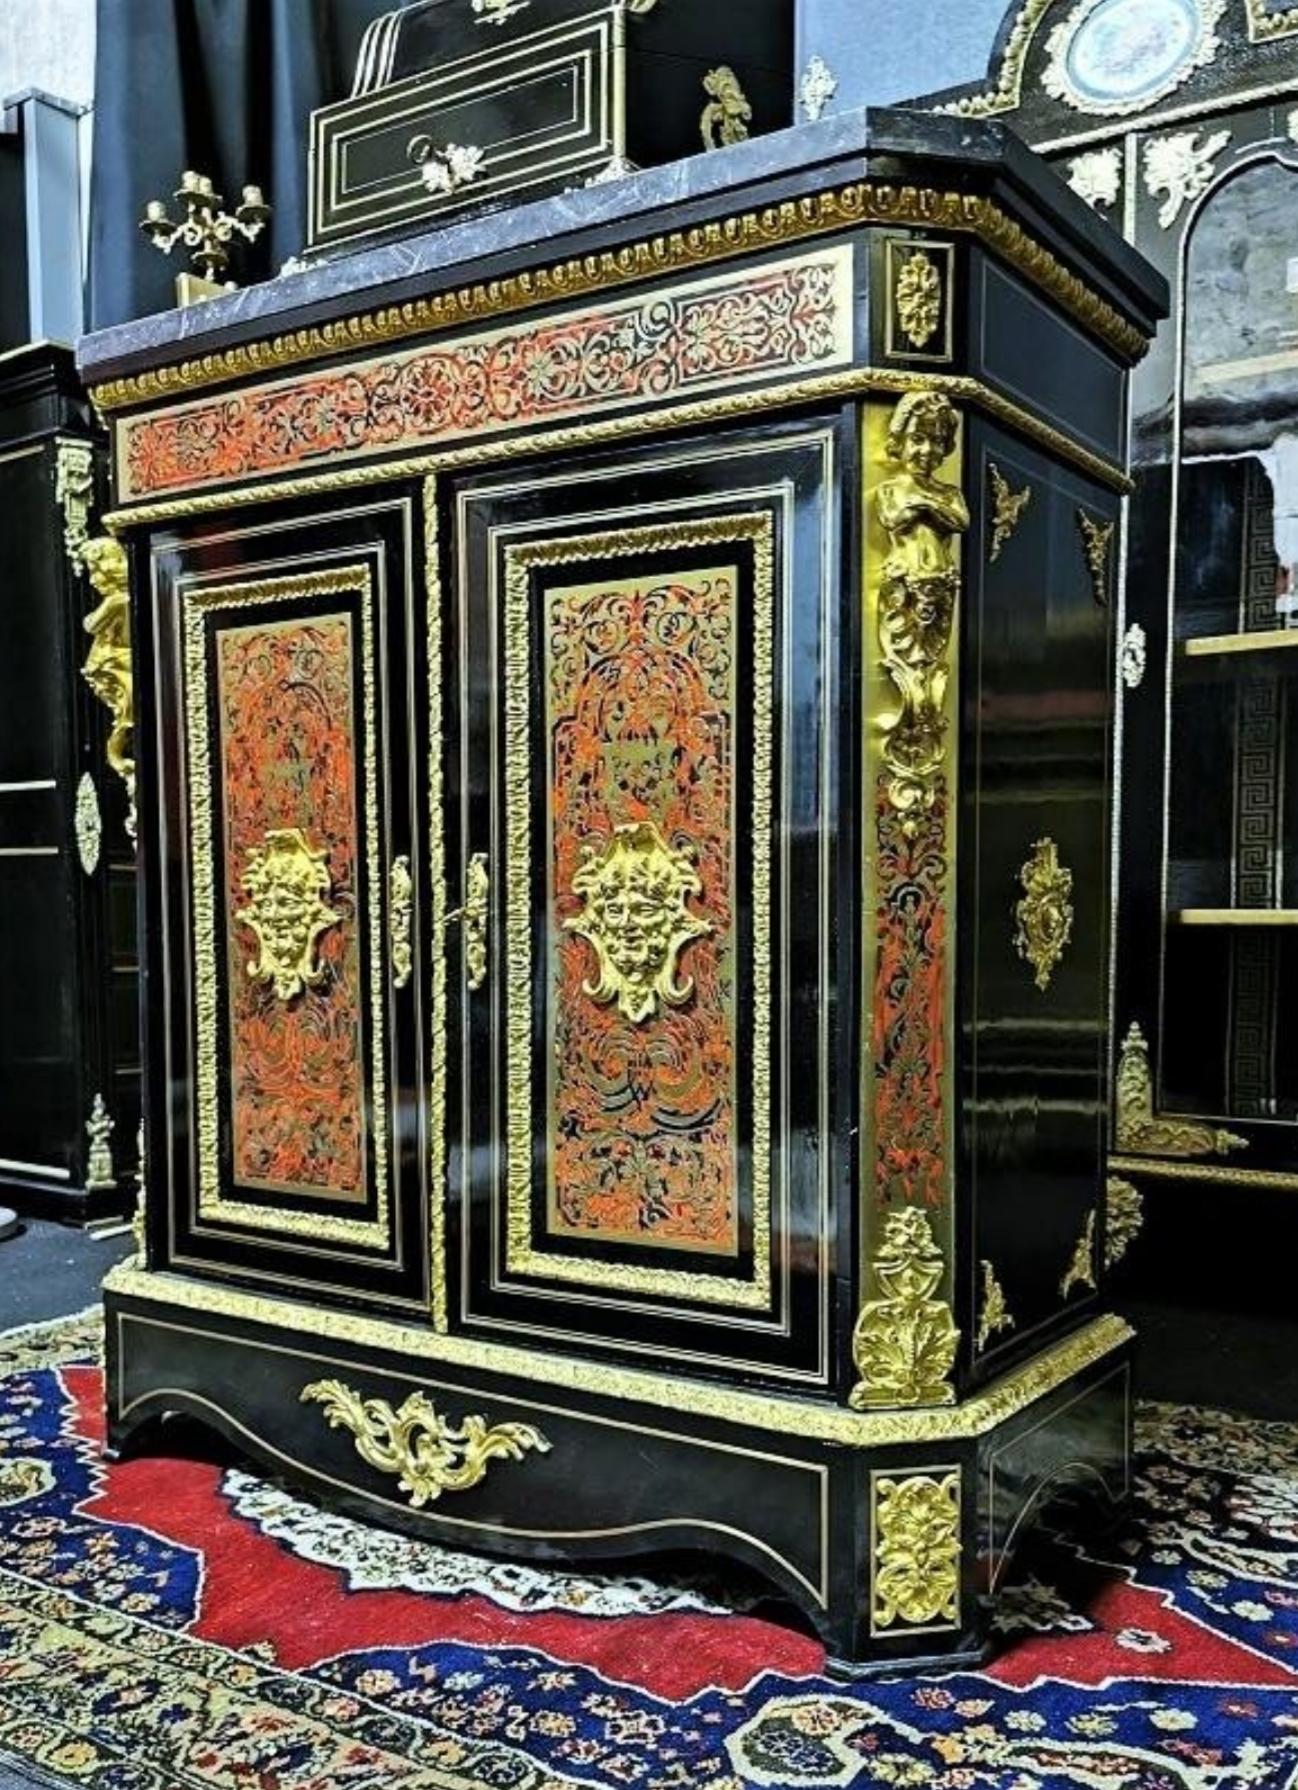 Gorgeous Napoleon III cabinet with two doors in Boulle style marquetry of brass and tortoiseshell, with interlacing patterns and scrolls. Beautiful ornamentation of gilded bronzes with masks, caryatids, falls, spandrels, ingot molds, and angles.